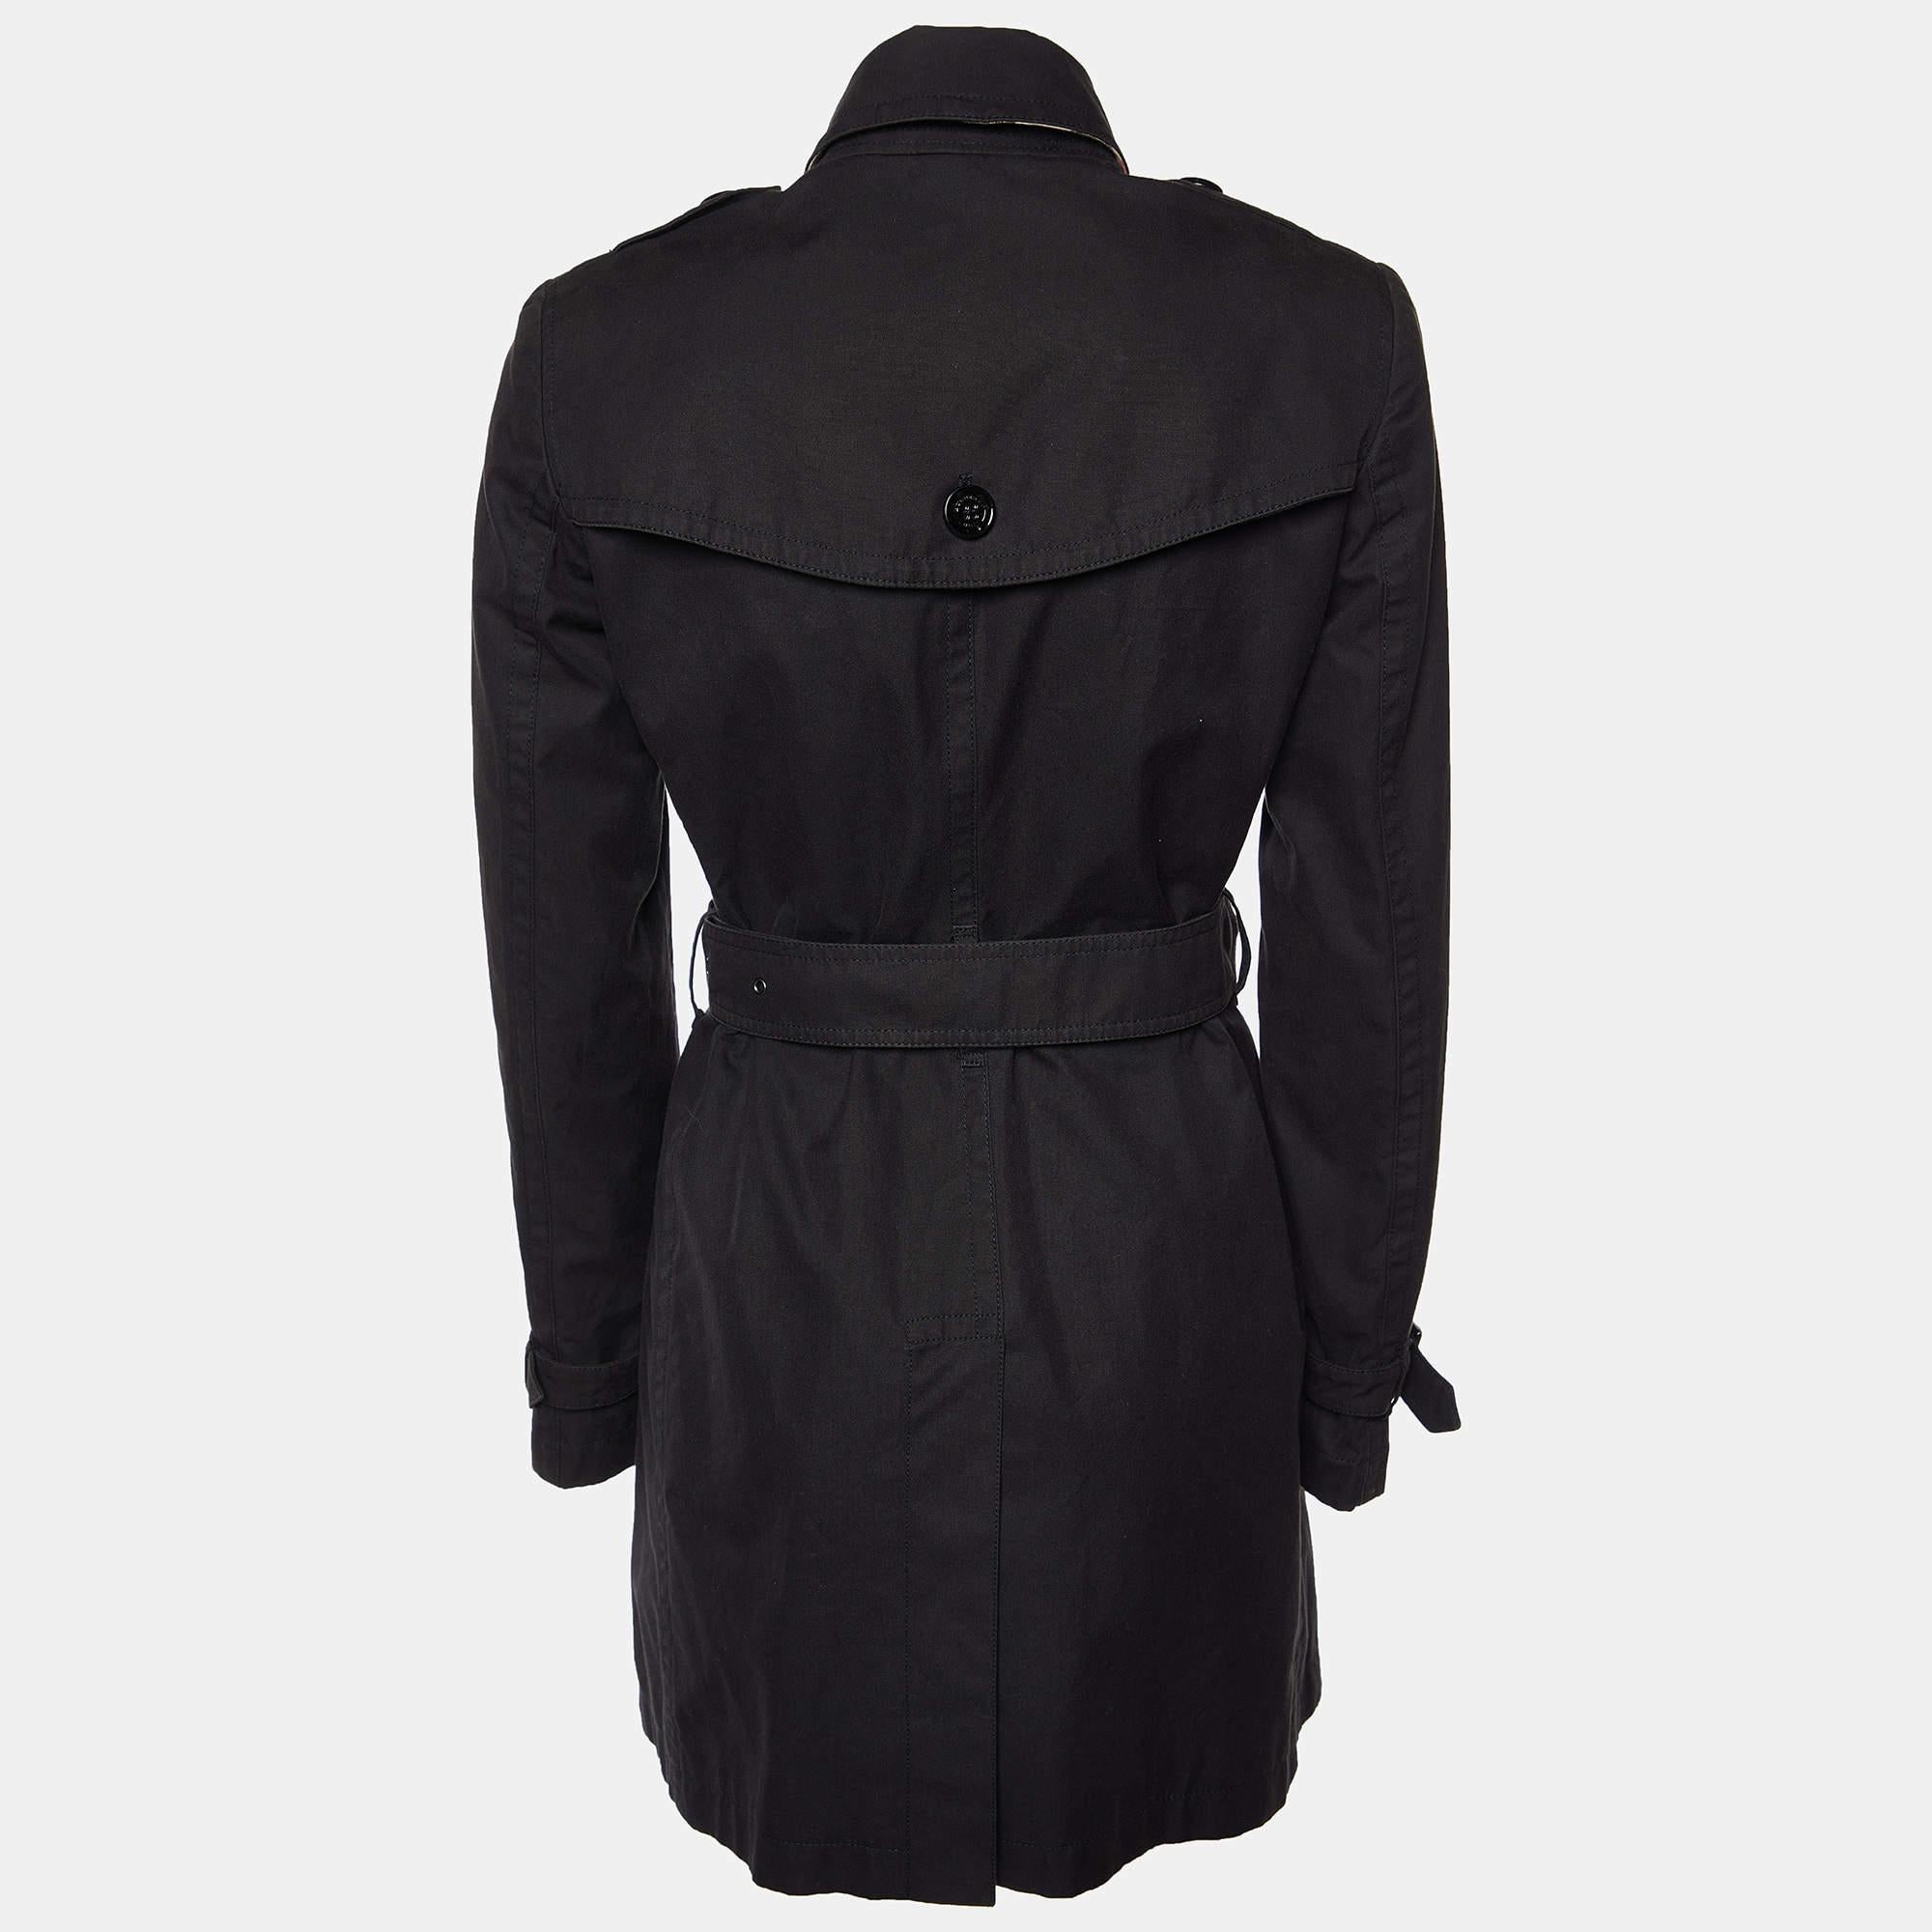 Coats like this one are an amazing accessory to polish your attire. Made from good fabrics and detailed with a noticeable design, this coat ensures your looks are always on point.

Includes: Belt